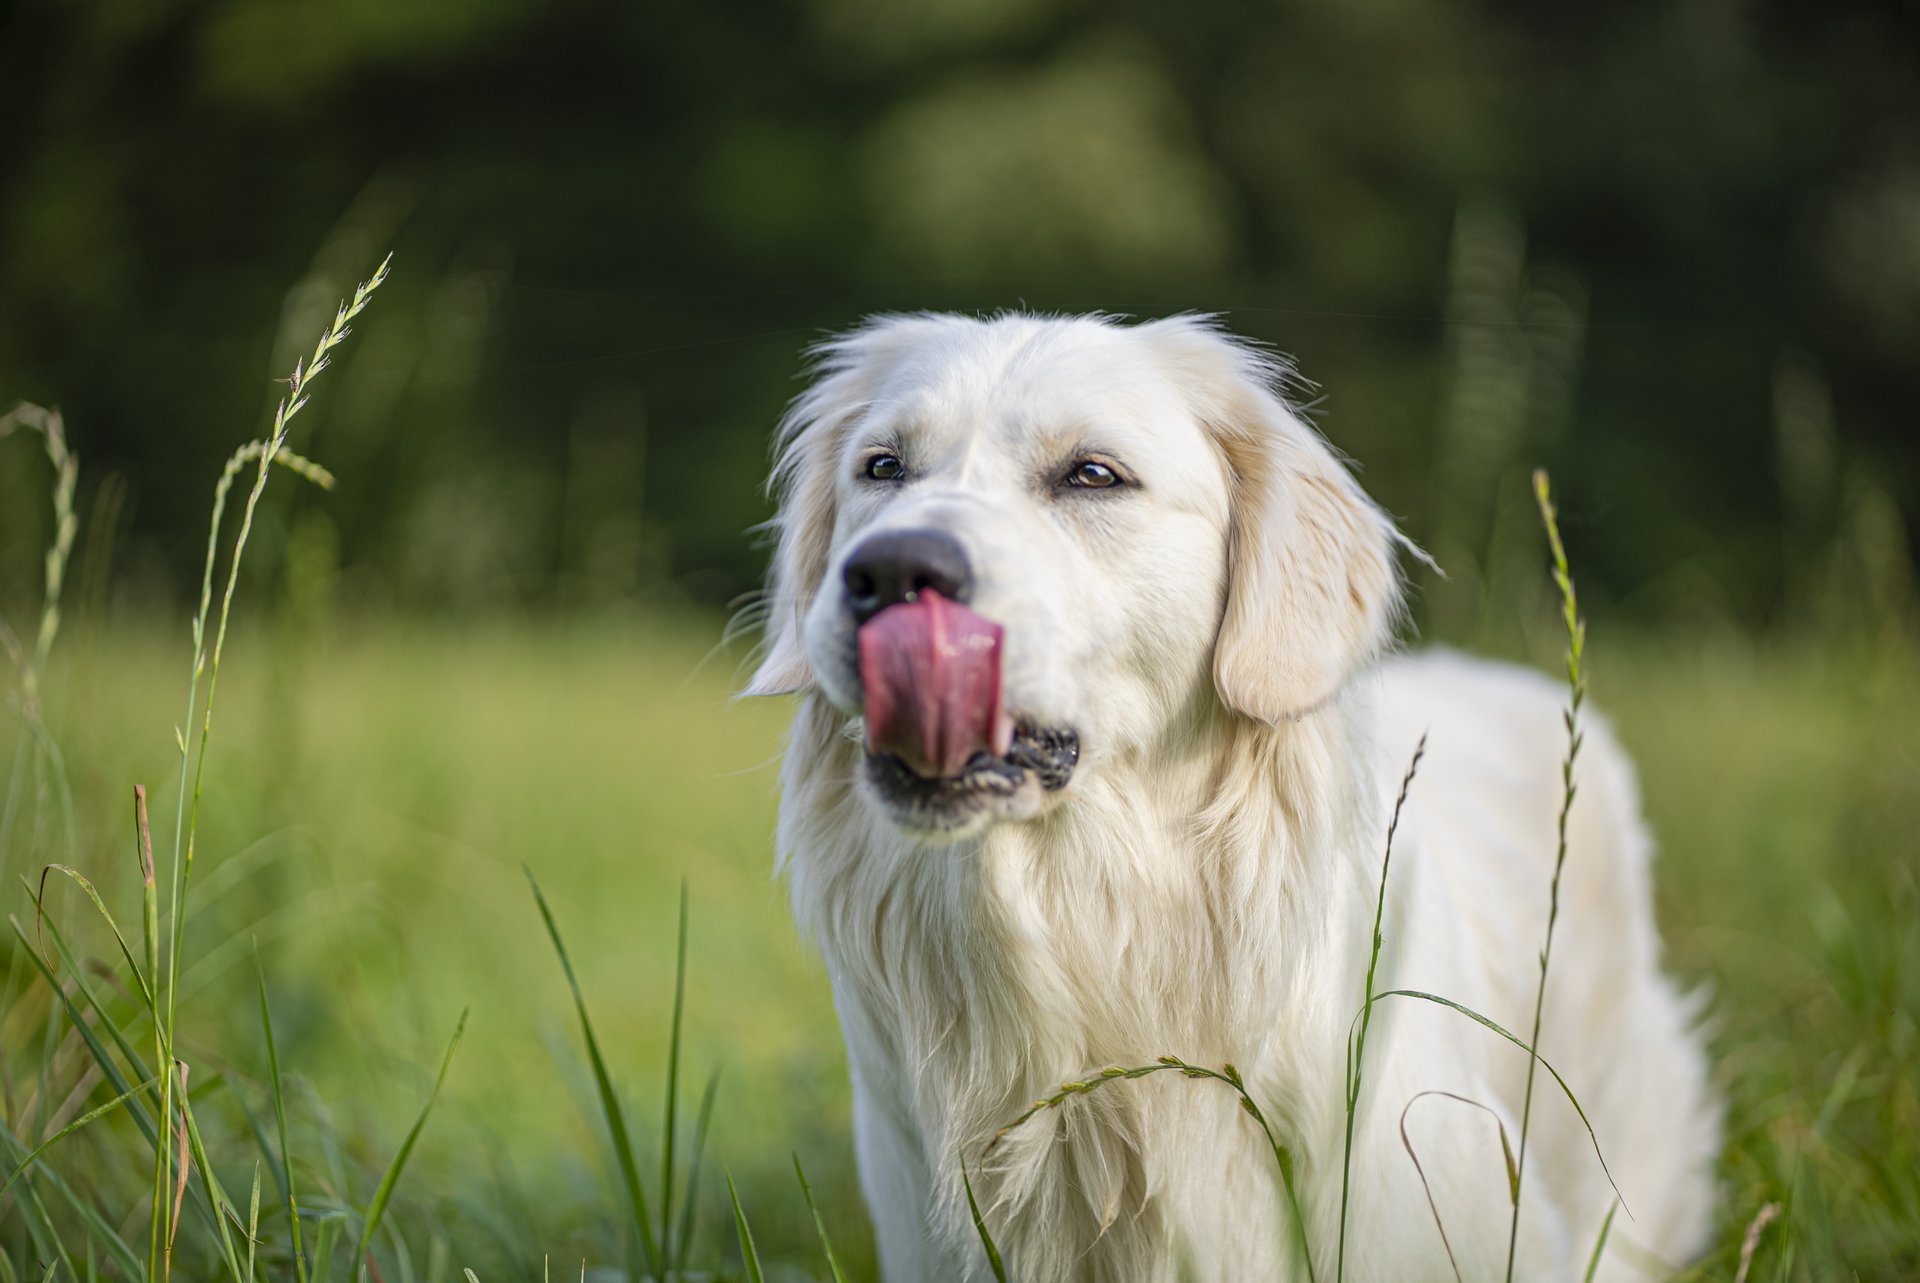 what does it mean when a dog eatds grass